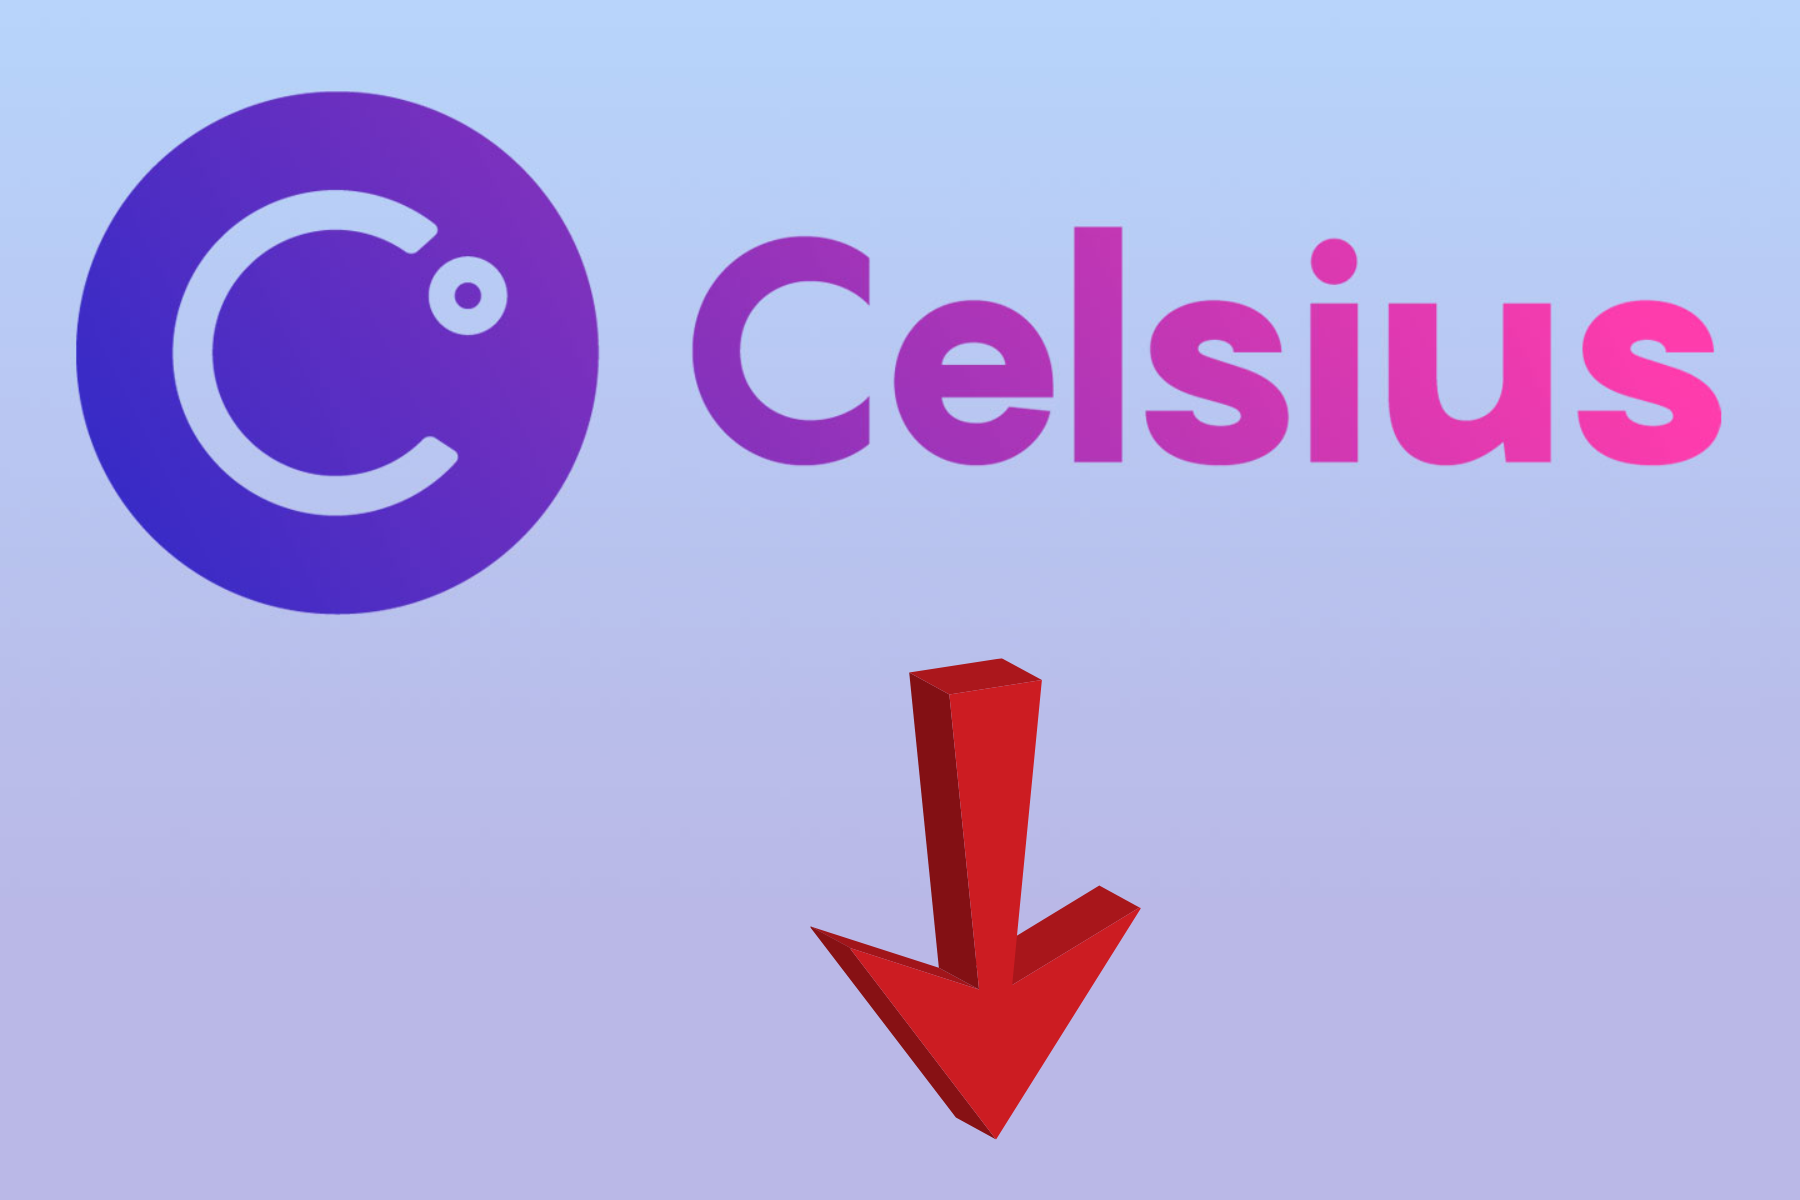 Celcius' logo features a red arrow pointing downward, indicating that Celsius is falling